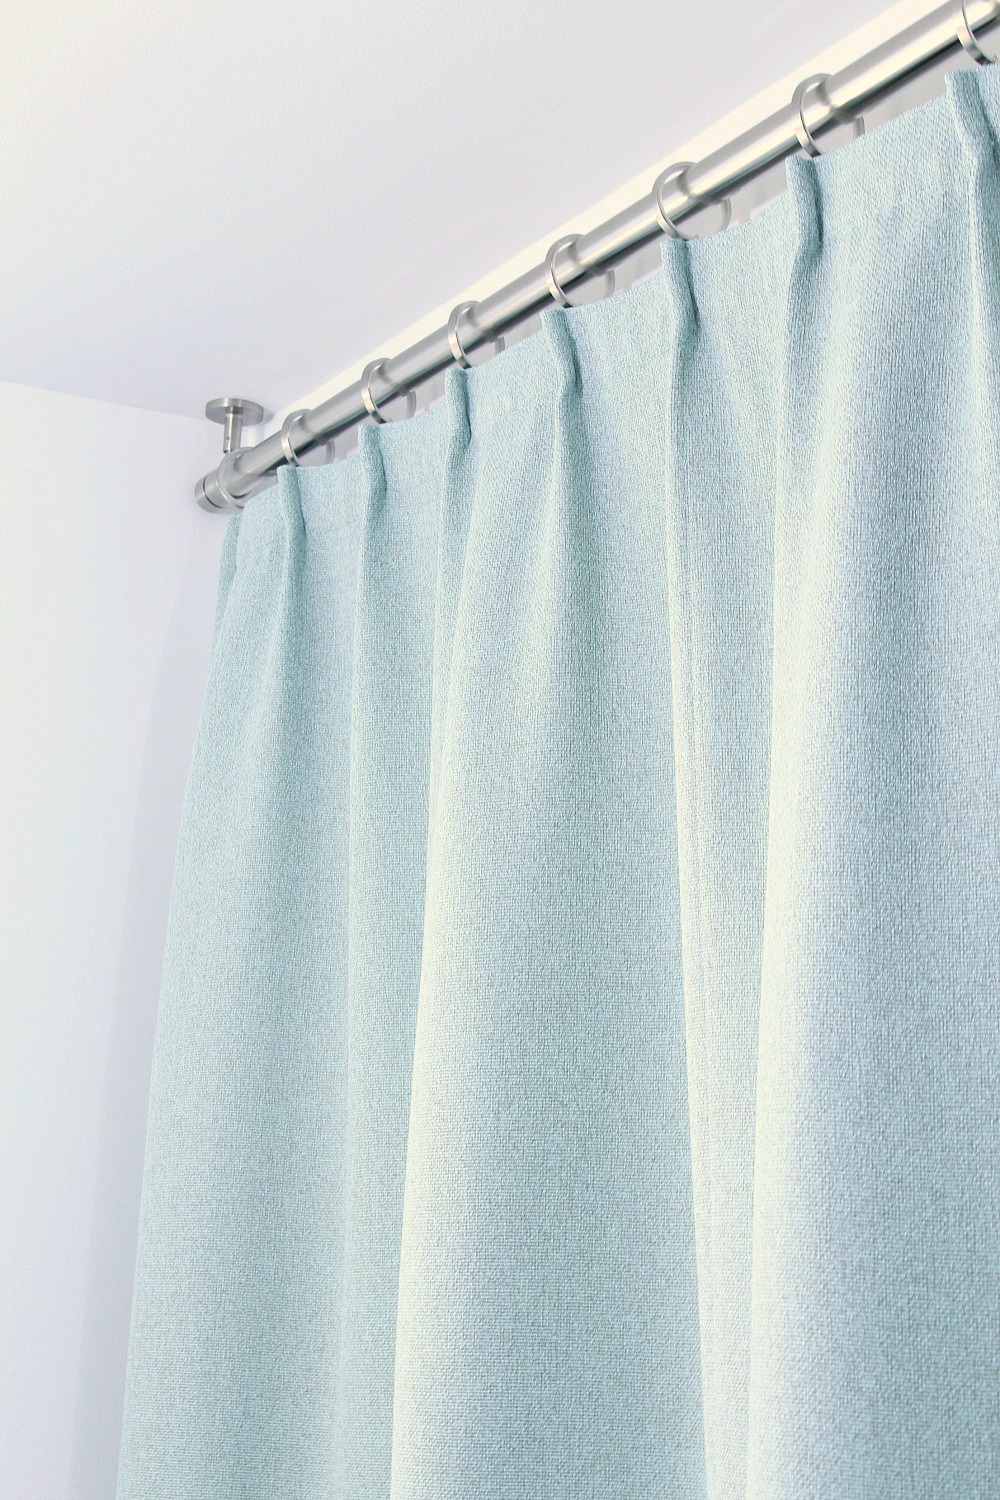 Bathroom Update Ceiling Mounted Shower Curtain Rod Turquoise